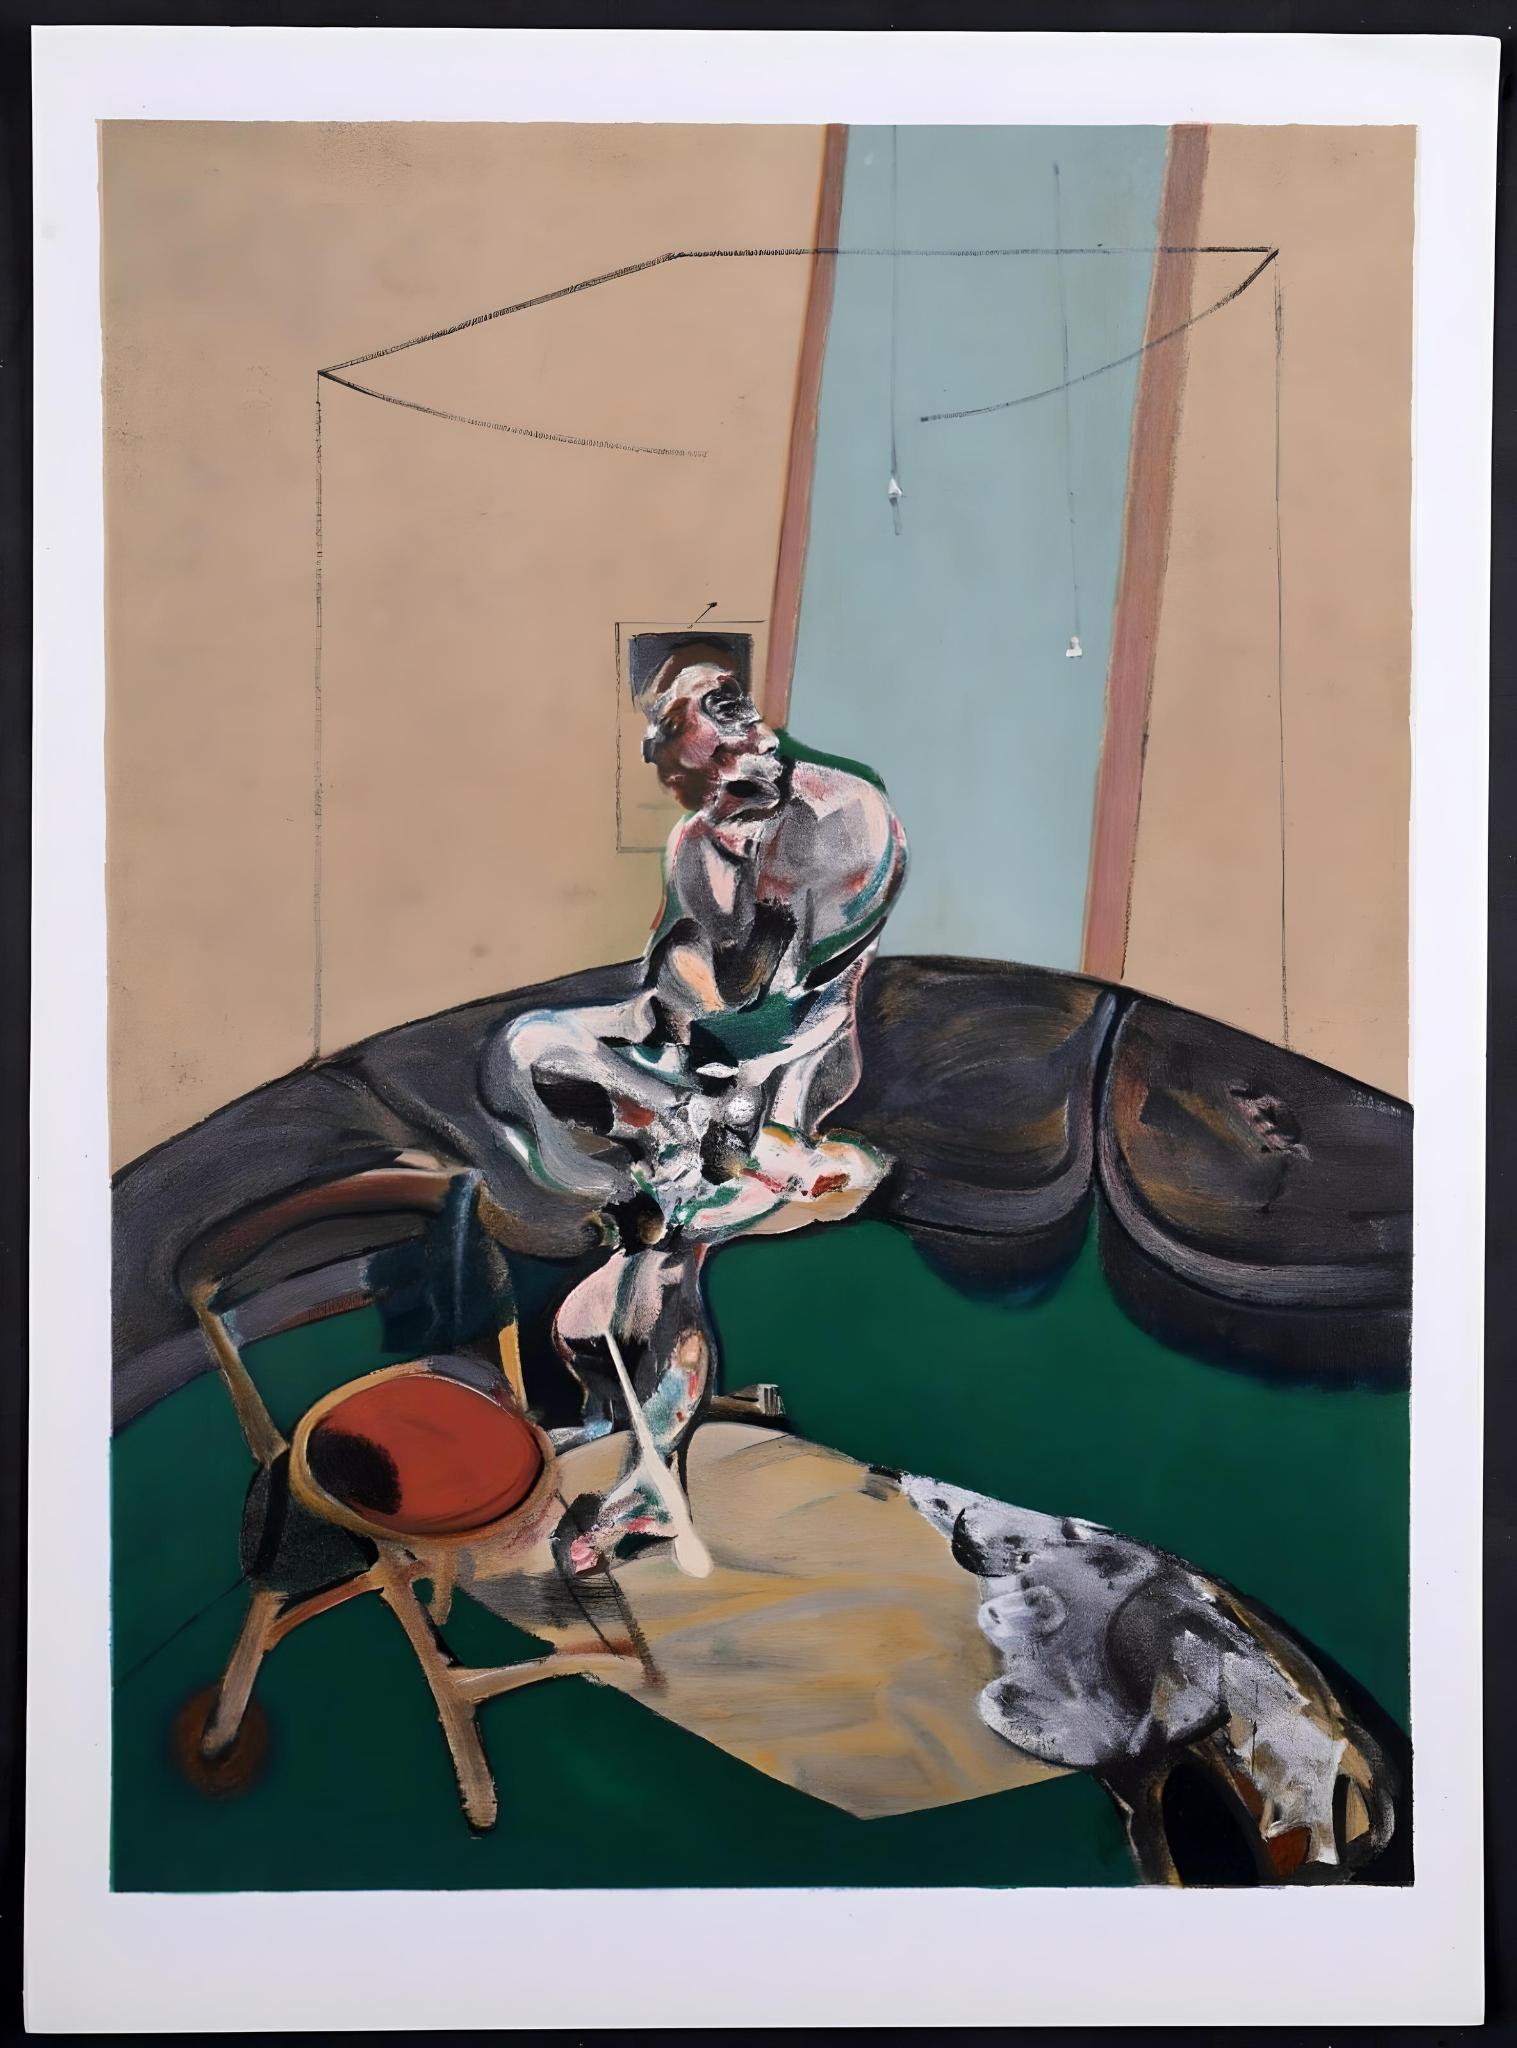 Bacon, Portrait of George Dyer Staring at Blind Cord, Derrière le miroir (after) - Modern Print by Francis Bacon